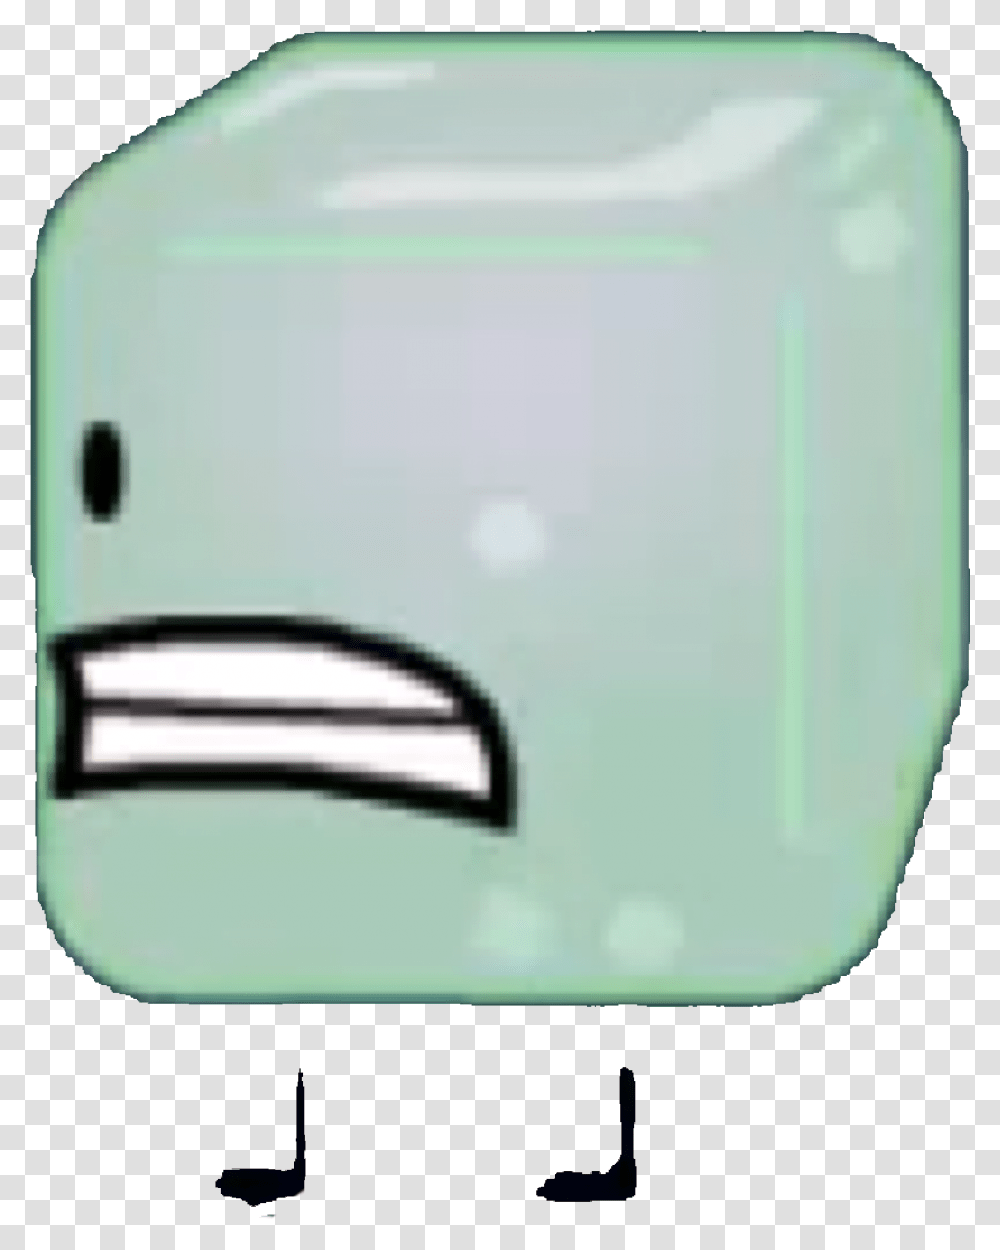 Acid Ice Cube Bfdi Acid Ice Cube, Electronics, Phone, Mobile Phone, Cell Phone Transparent Png